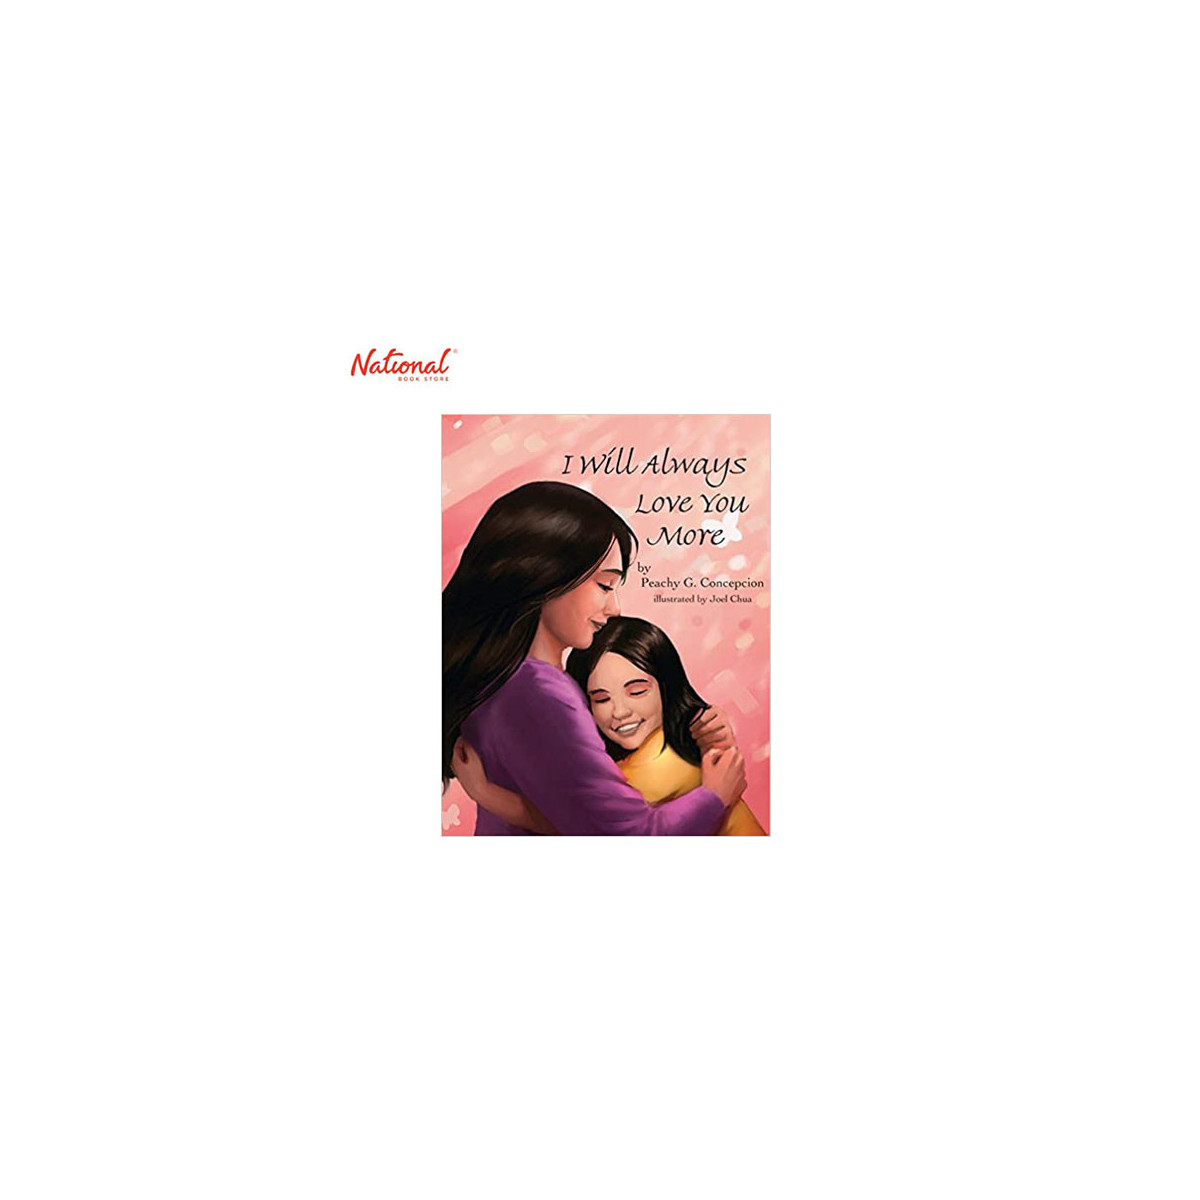 I Will Always Love You More Trade Paperback by Peachy Concepcion